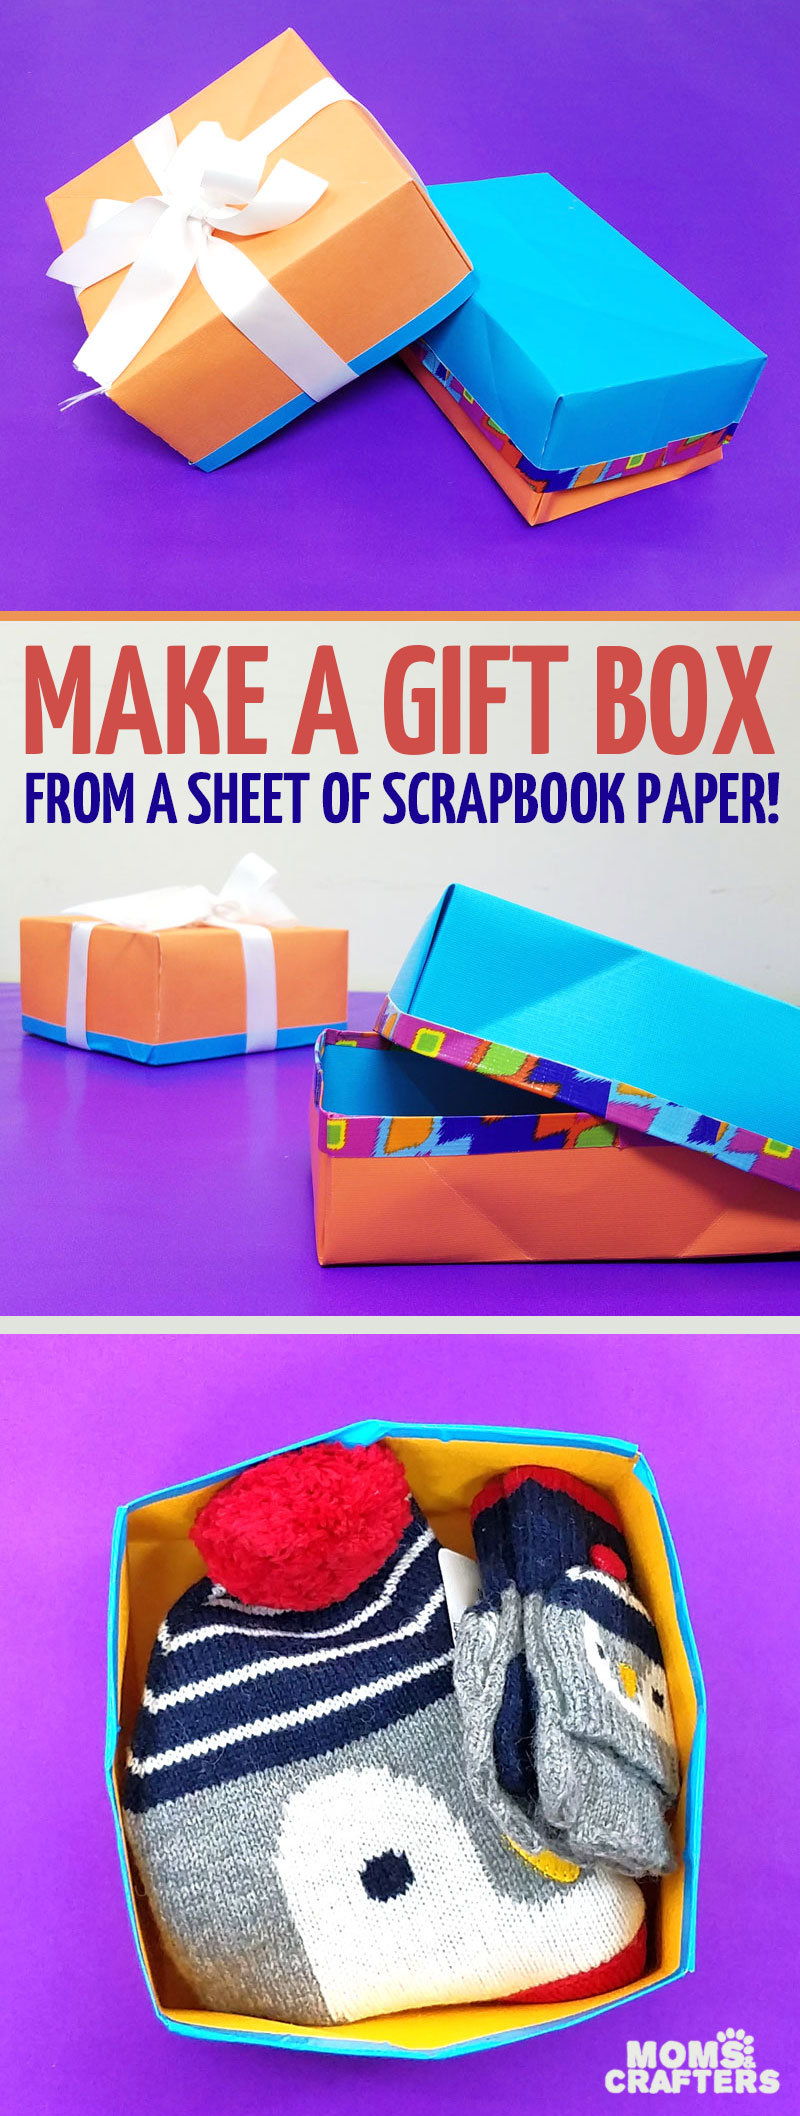 How to Make a DIY Explosion Box - It's Always Autumn